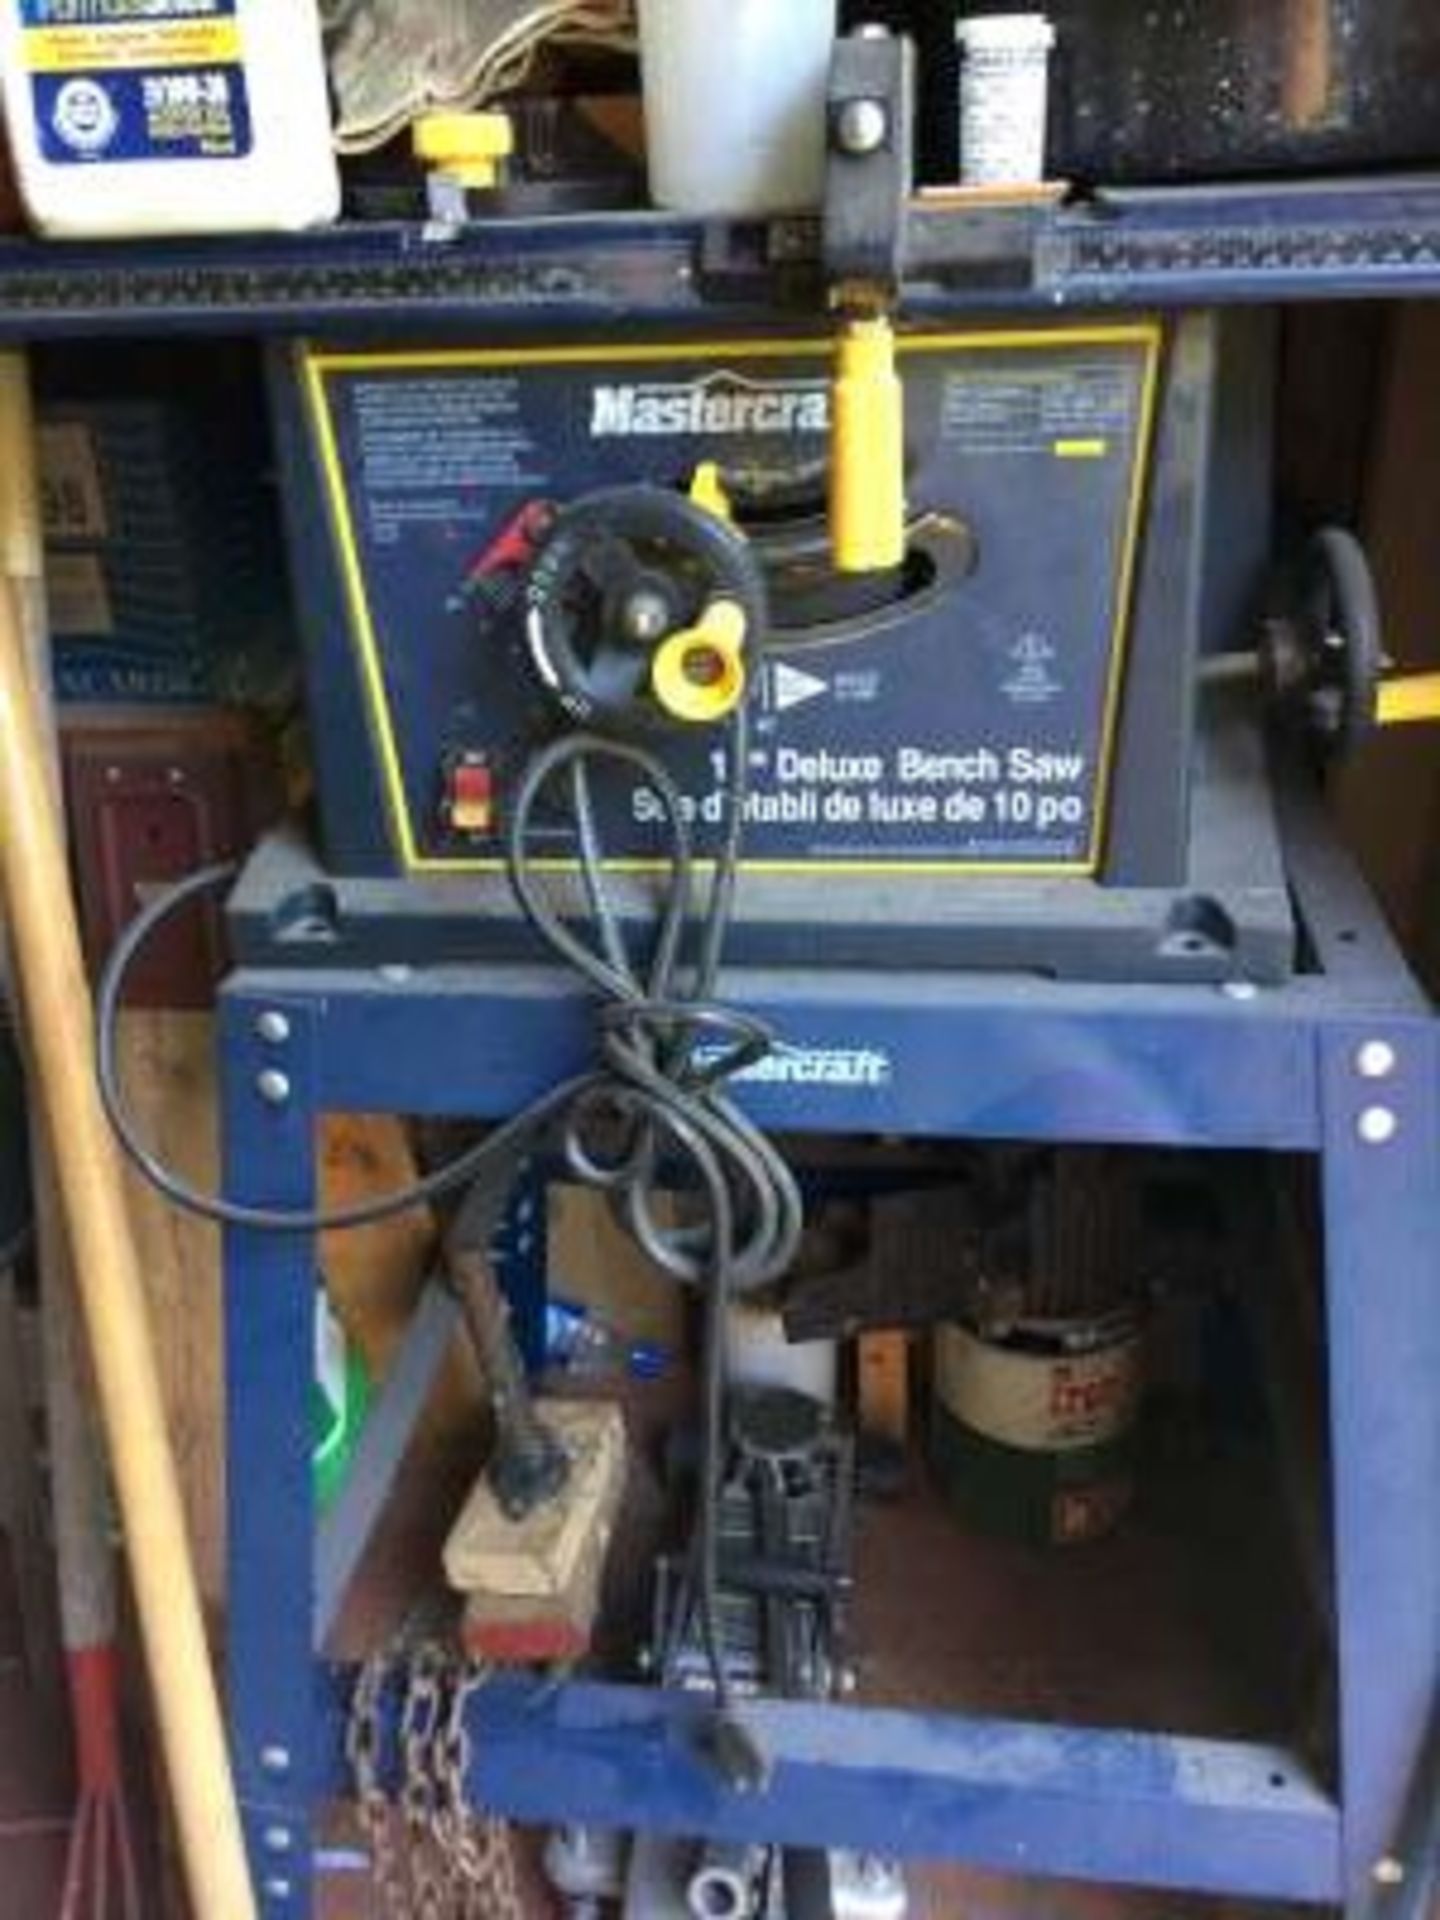 Mastercraft 10” Deluxe bench saw